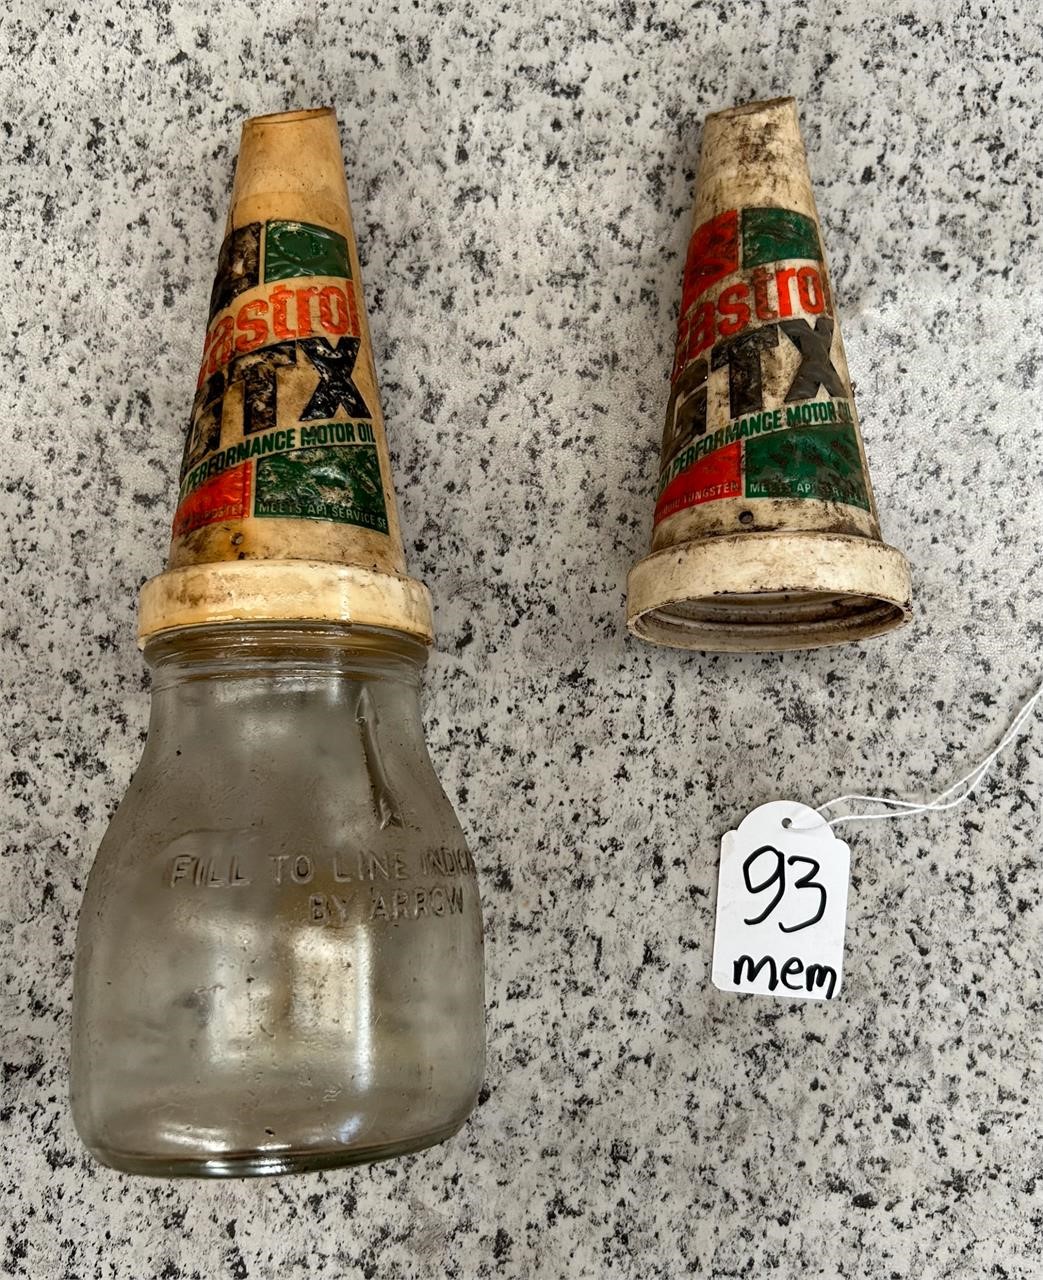 old Castrol oil bottle with 2 spouts